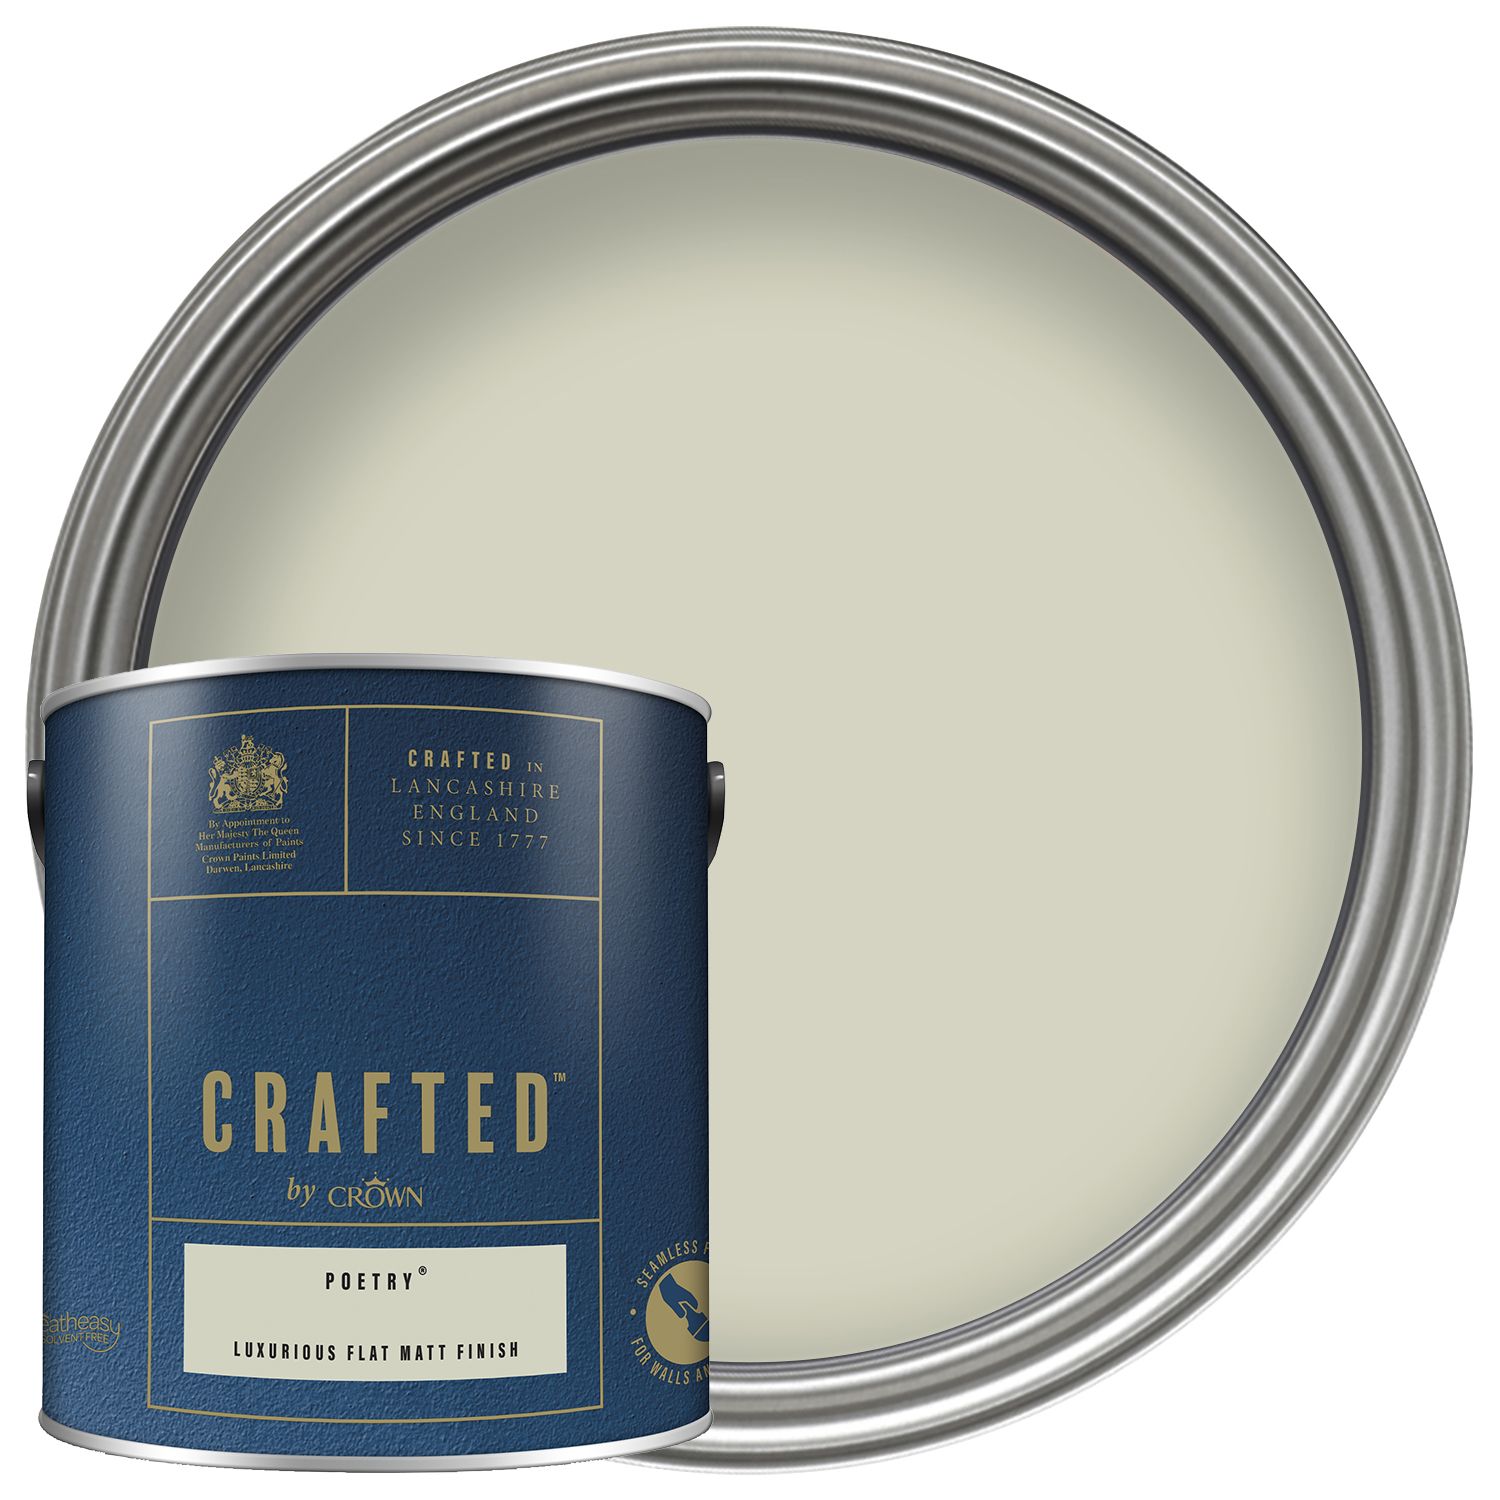 Image of CRAFTED™ by Crown Flat Matt Emulsion Interior Paint - Poetry™ - 2.5L